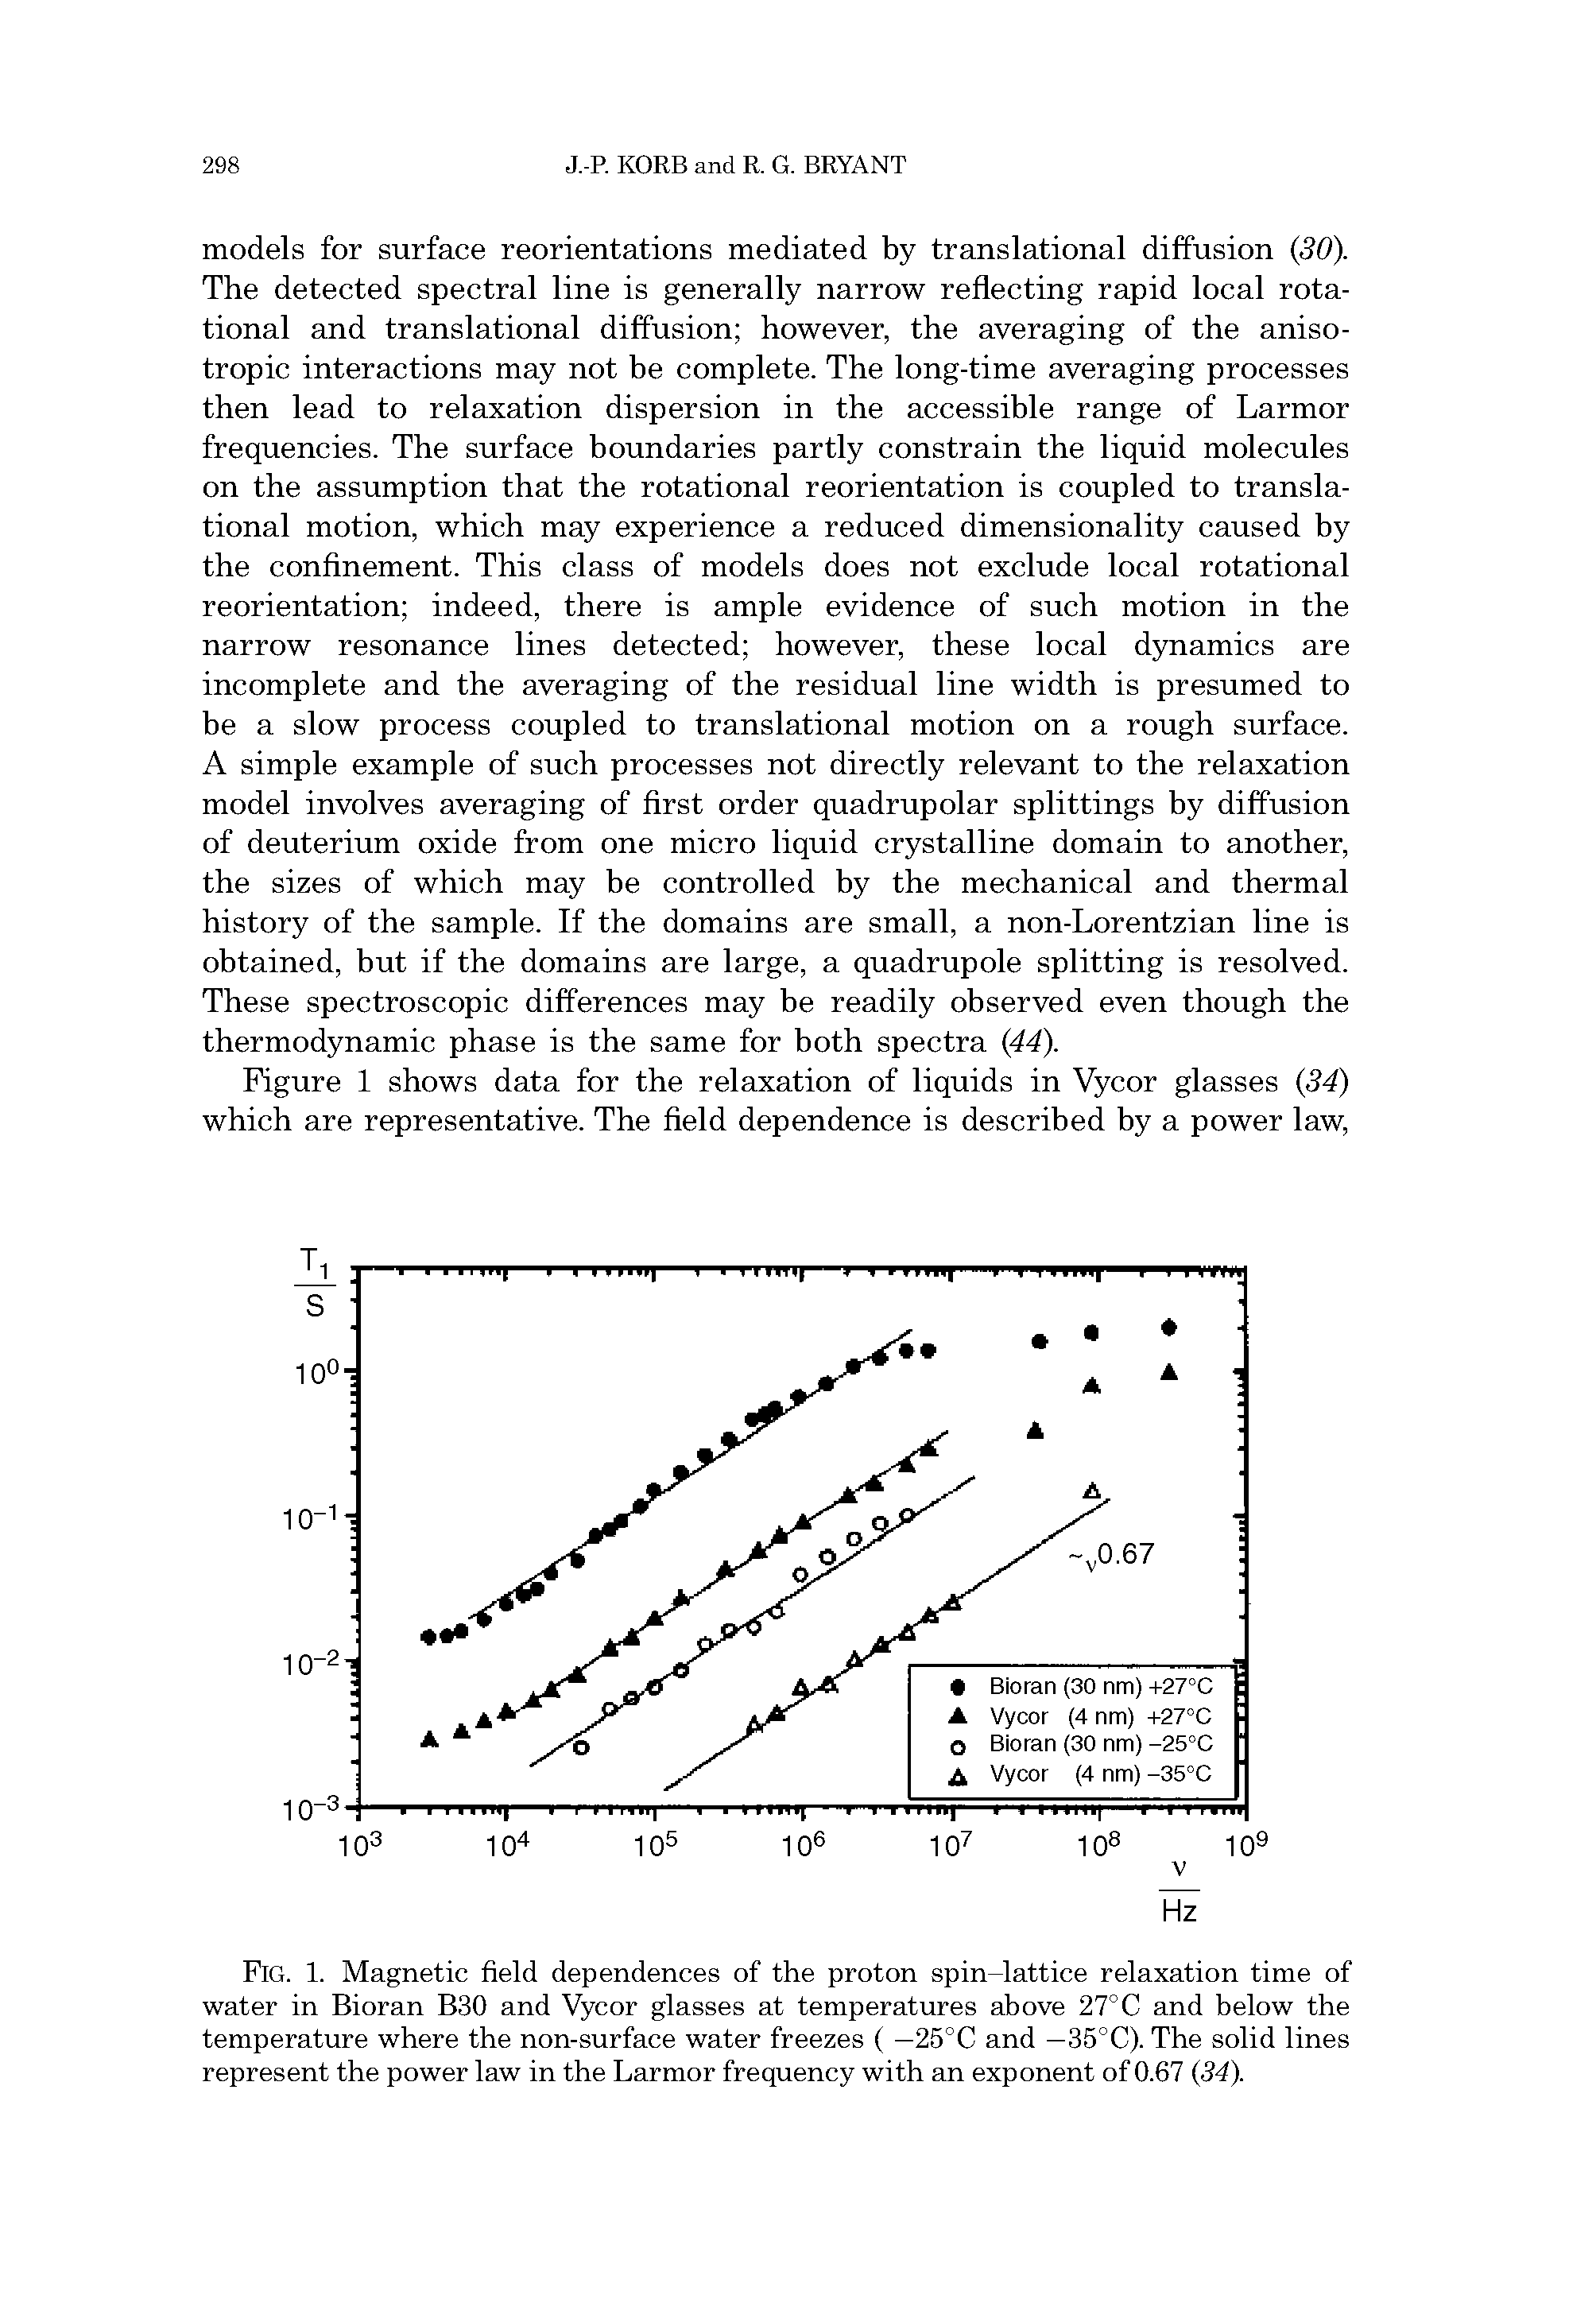 Fig. 1. Magnetic field dependences of the proton spin-lattice relaxation time of water in Bioran B30 and Vycor glasses at temperatures above 27°C and below the temperature where the non-surface water freezes ( —25°C and —35°C). The solid lines represent the power law in the Larmor frequency with an exponent of 0.67 (34).